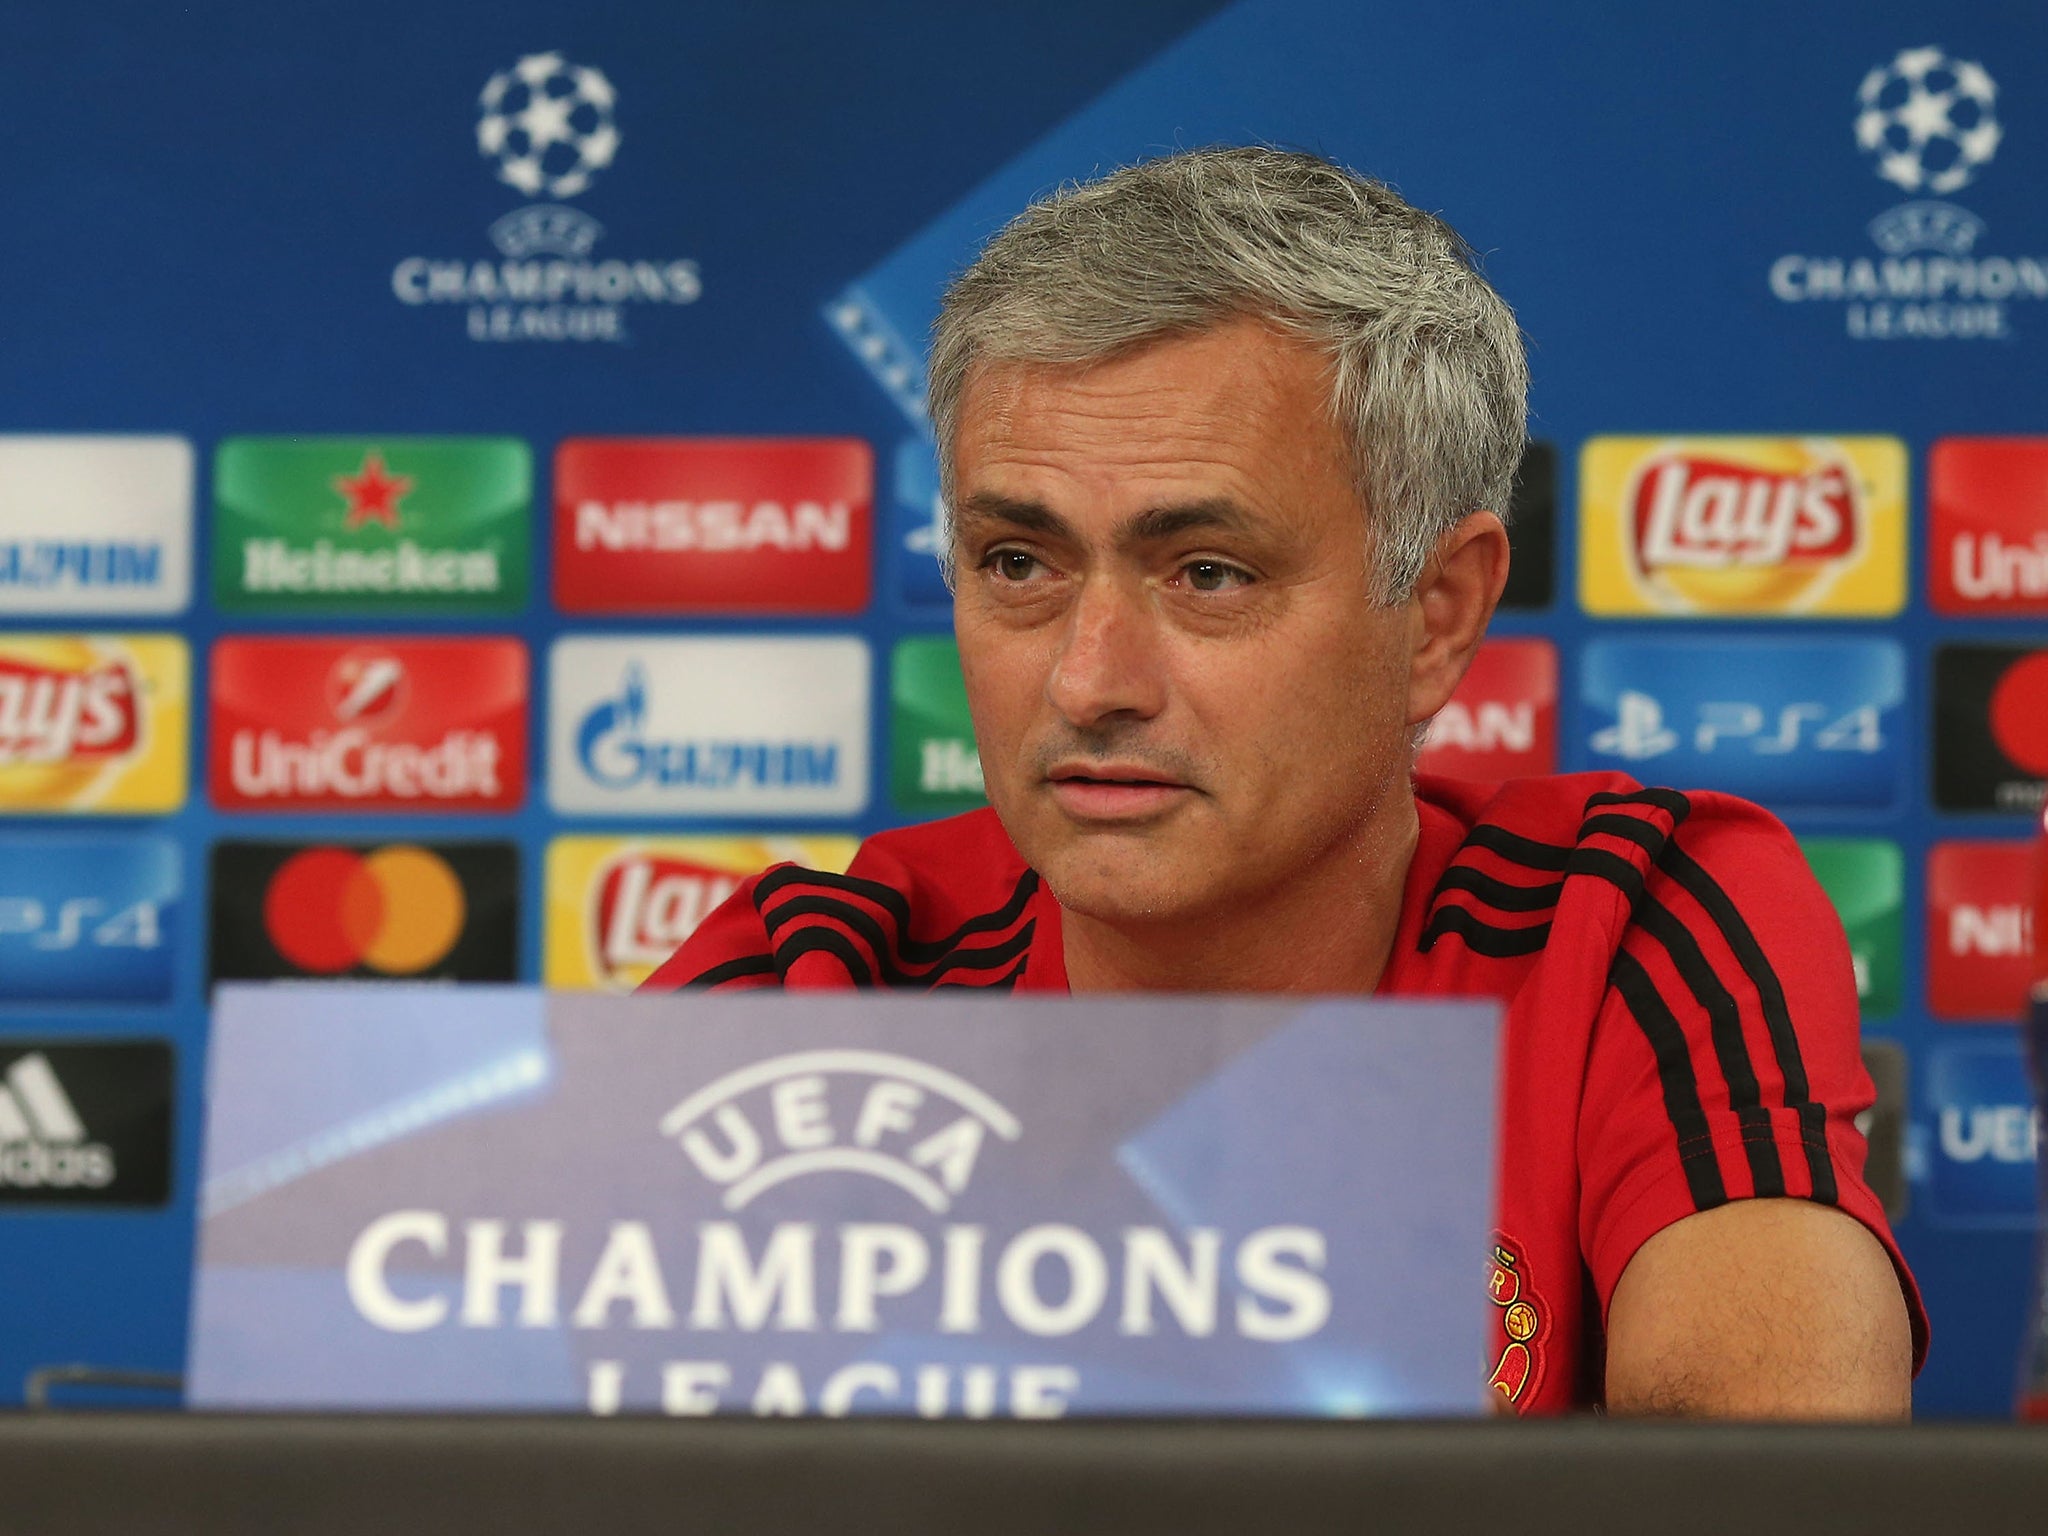 Jose Mourinho denied holding talks over a five-year contract extension at Manchester United